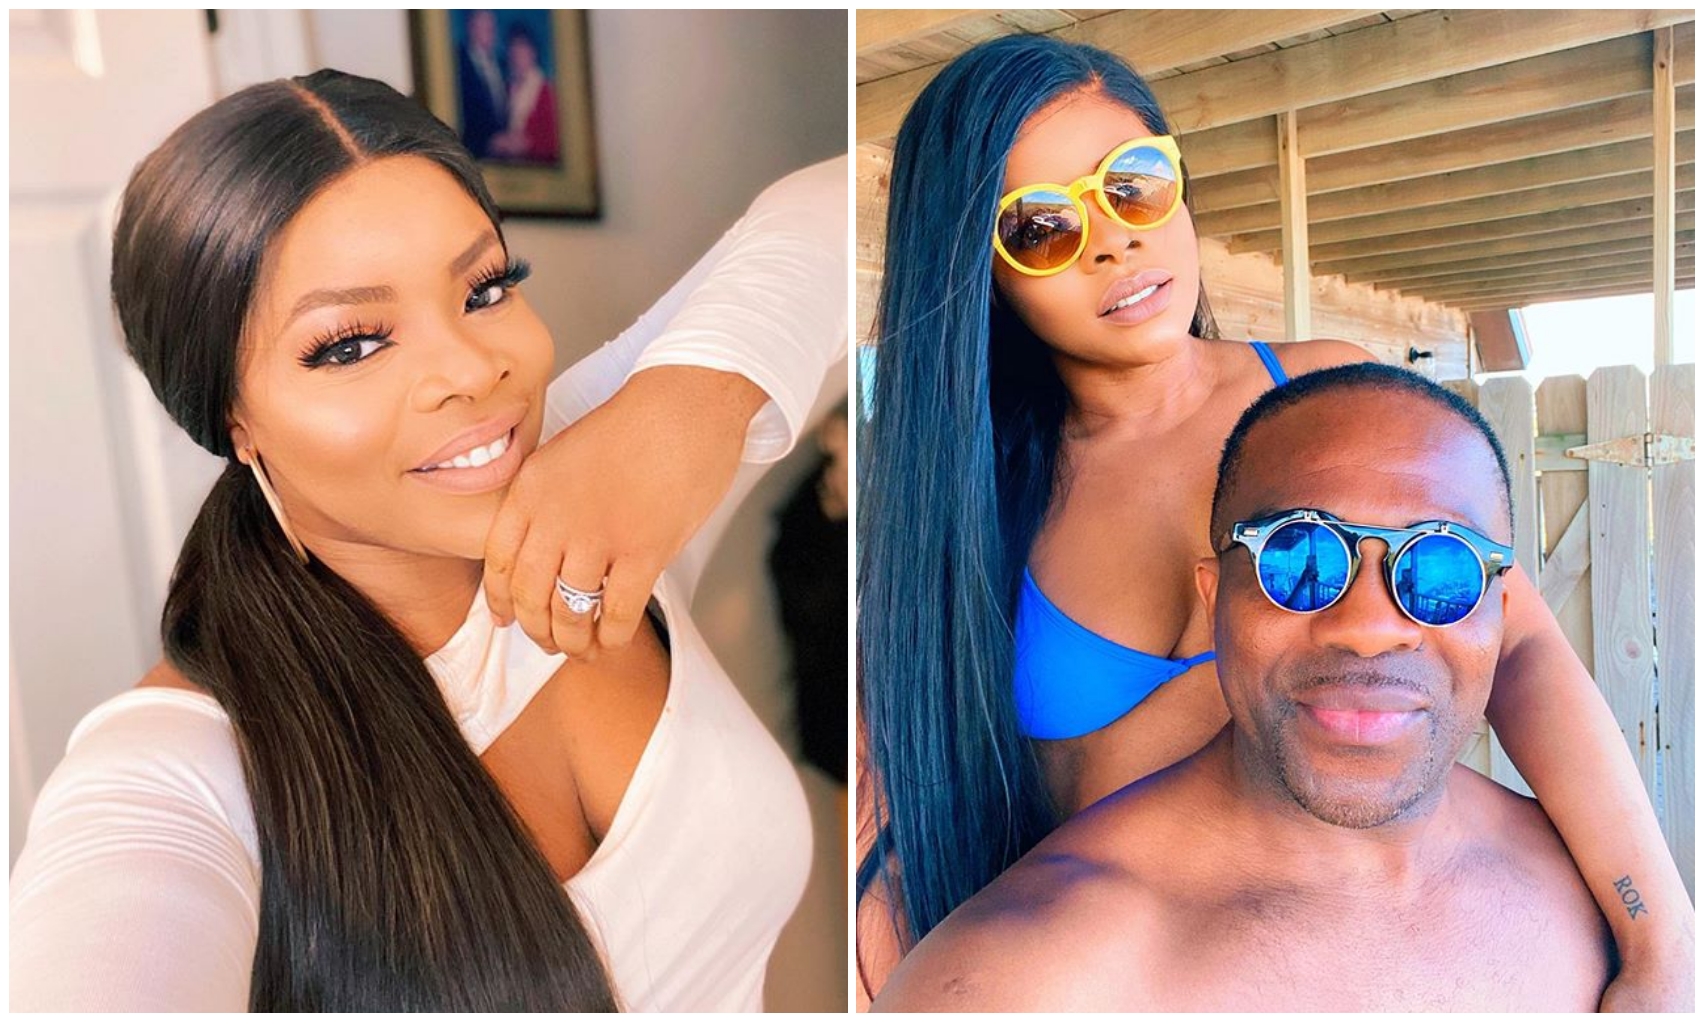 'When one loves, one doesn’t calculate' – Laura Ikeji says as she enjoys timeout with husband Ogbonna Kanu (Photos)